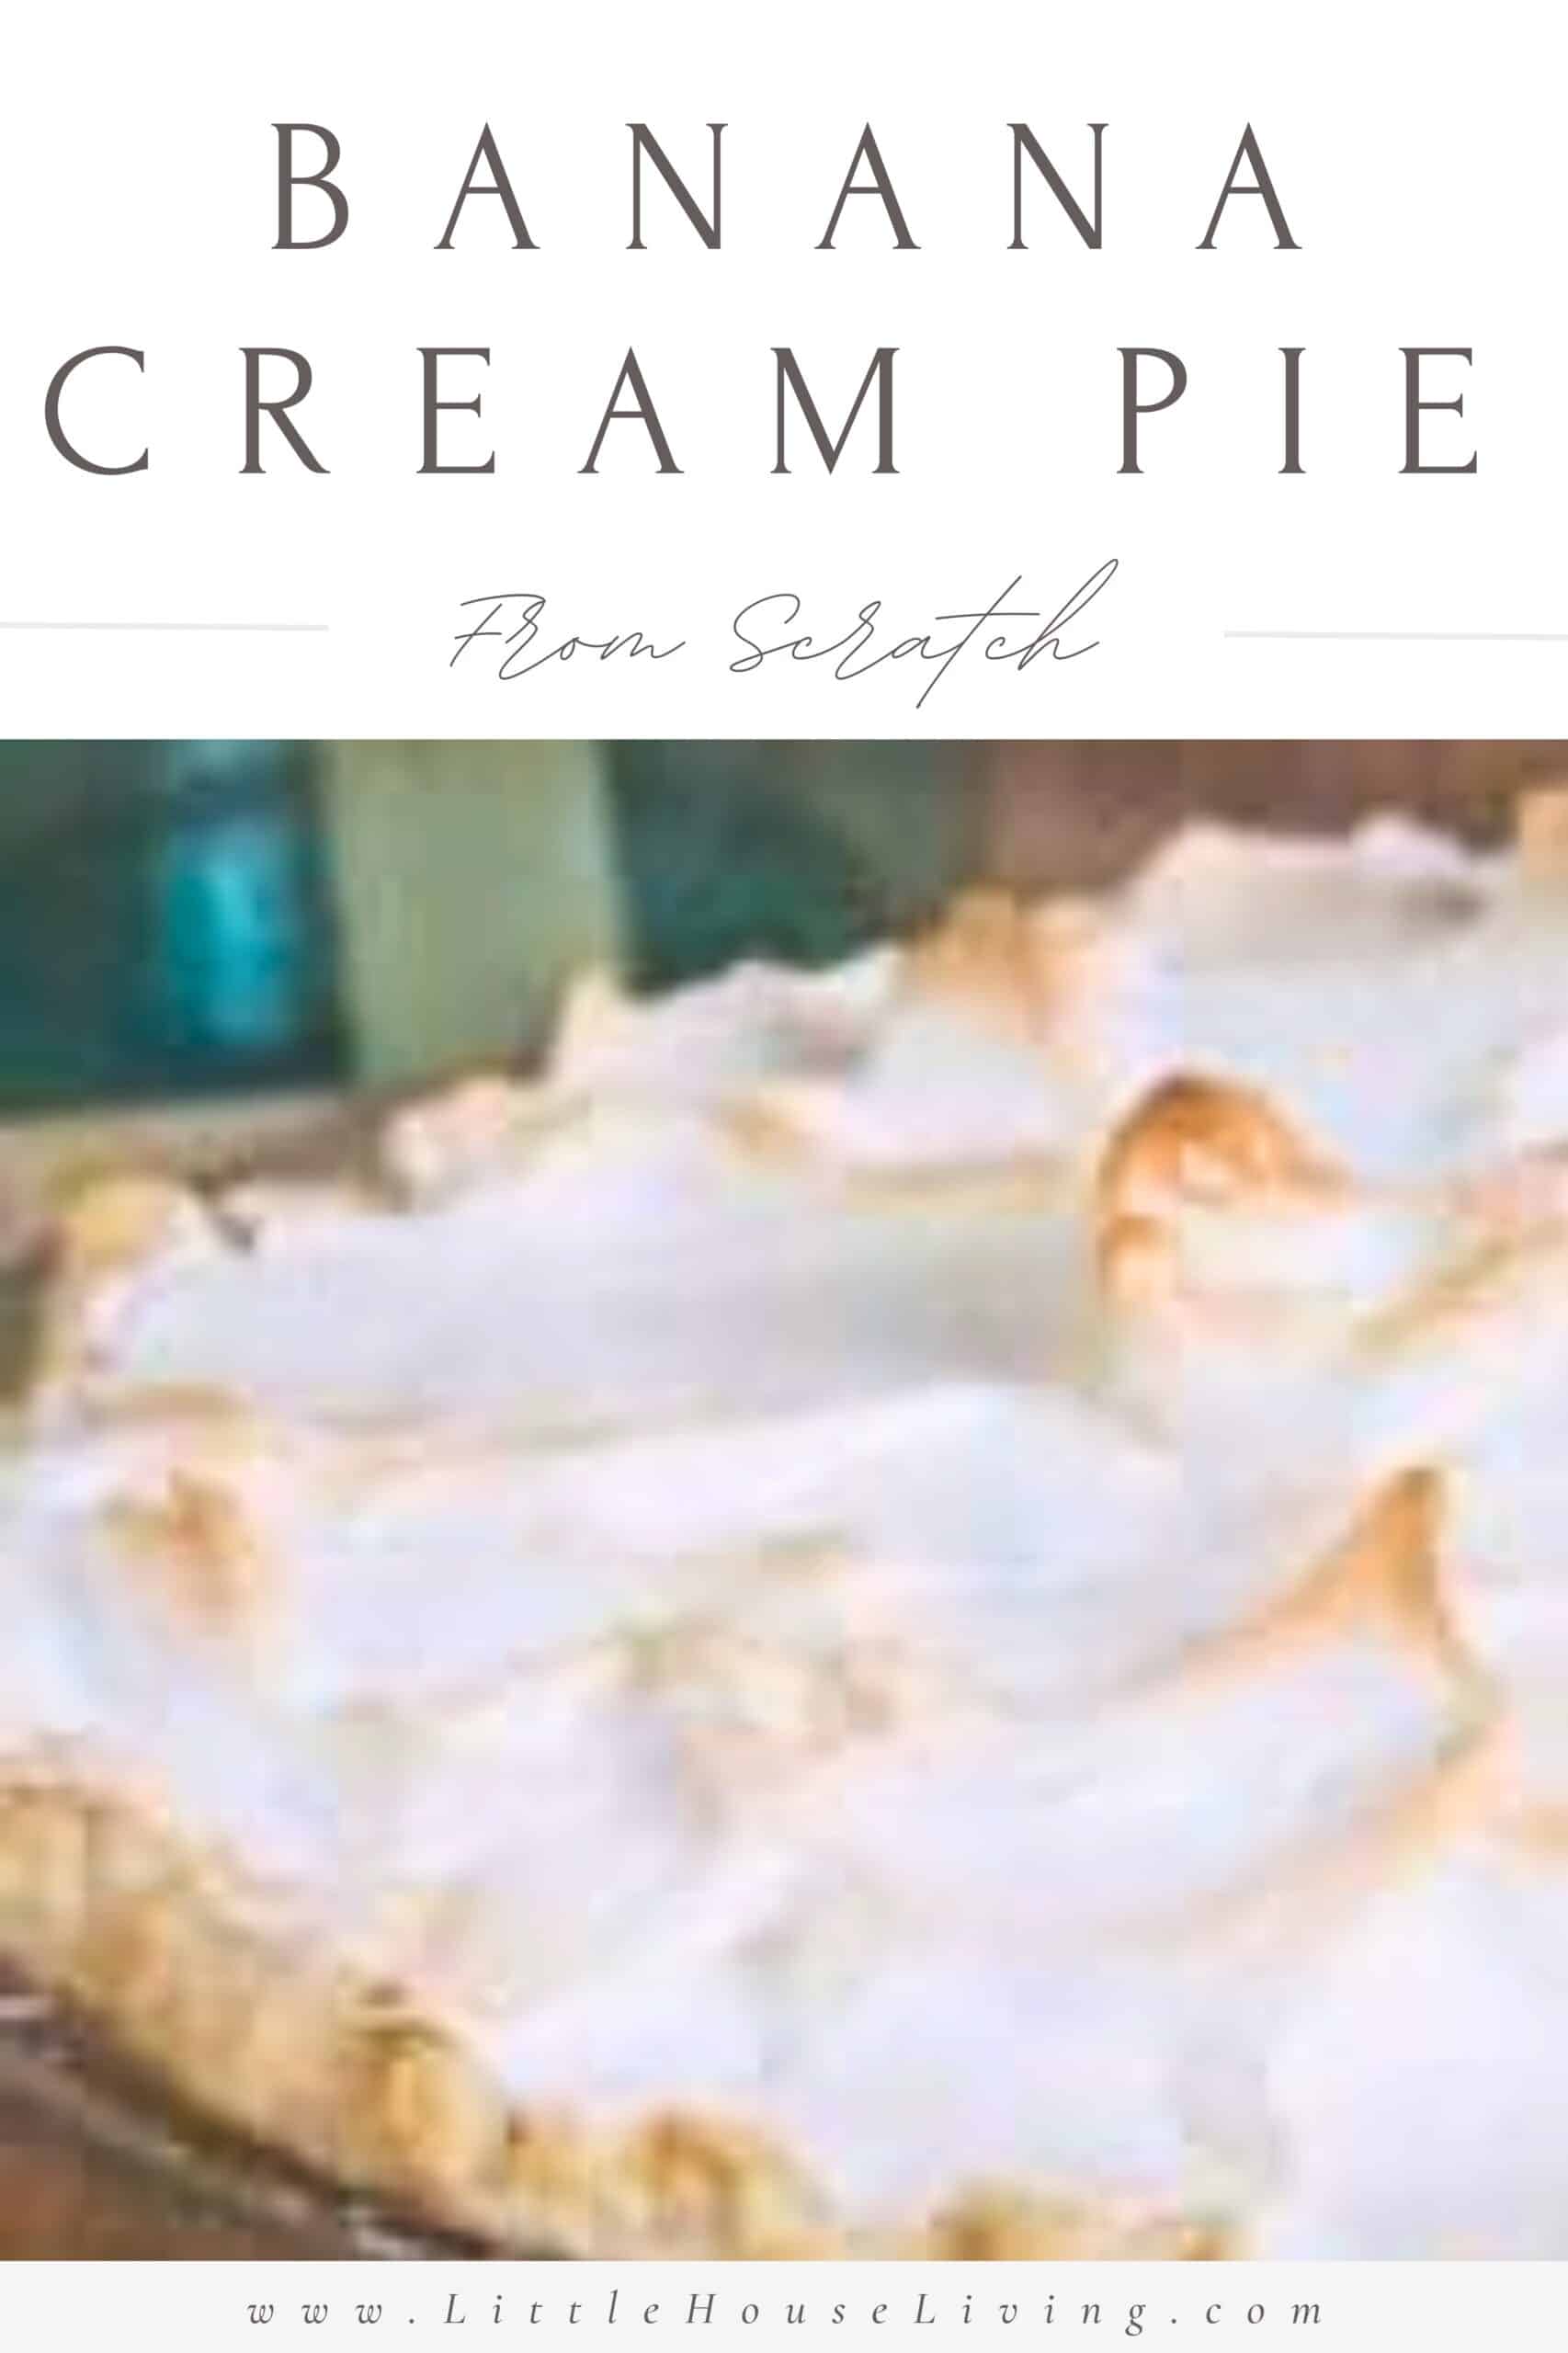 Do you love to enjoy a good homemade pie for dessert? This Banana Cream Pie recipe from scratch is delicious, easy to make, and looks beautiful with a homemade meringue piled high on top.